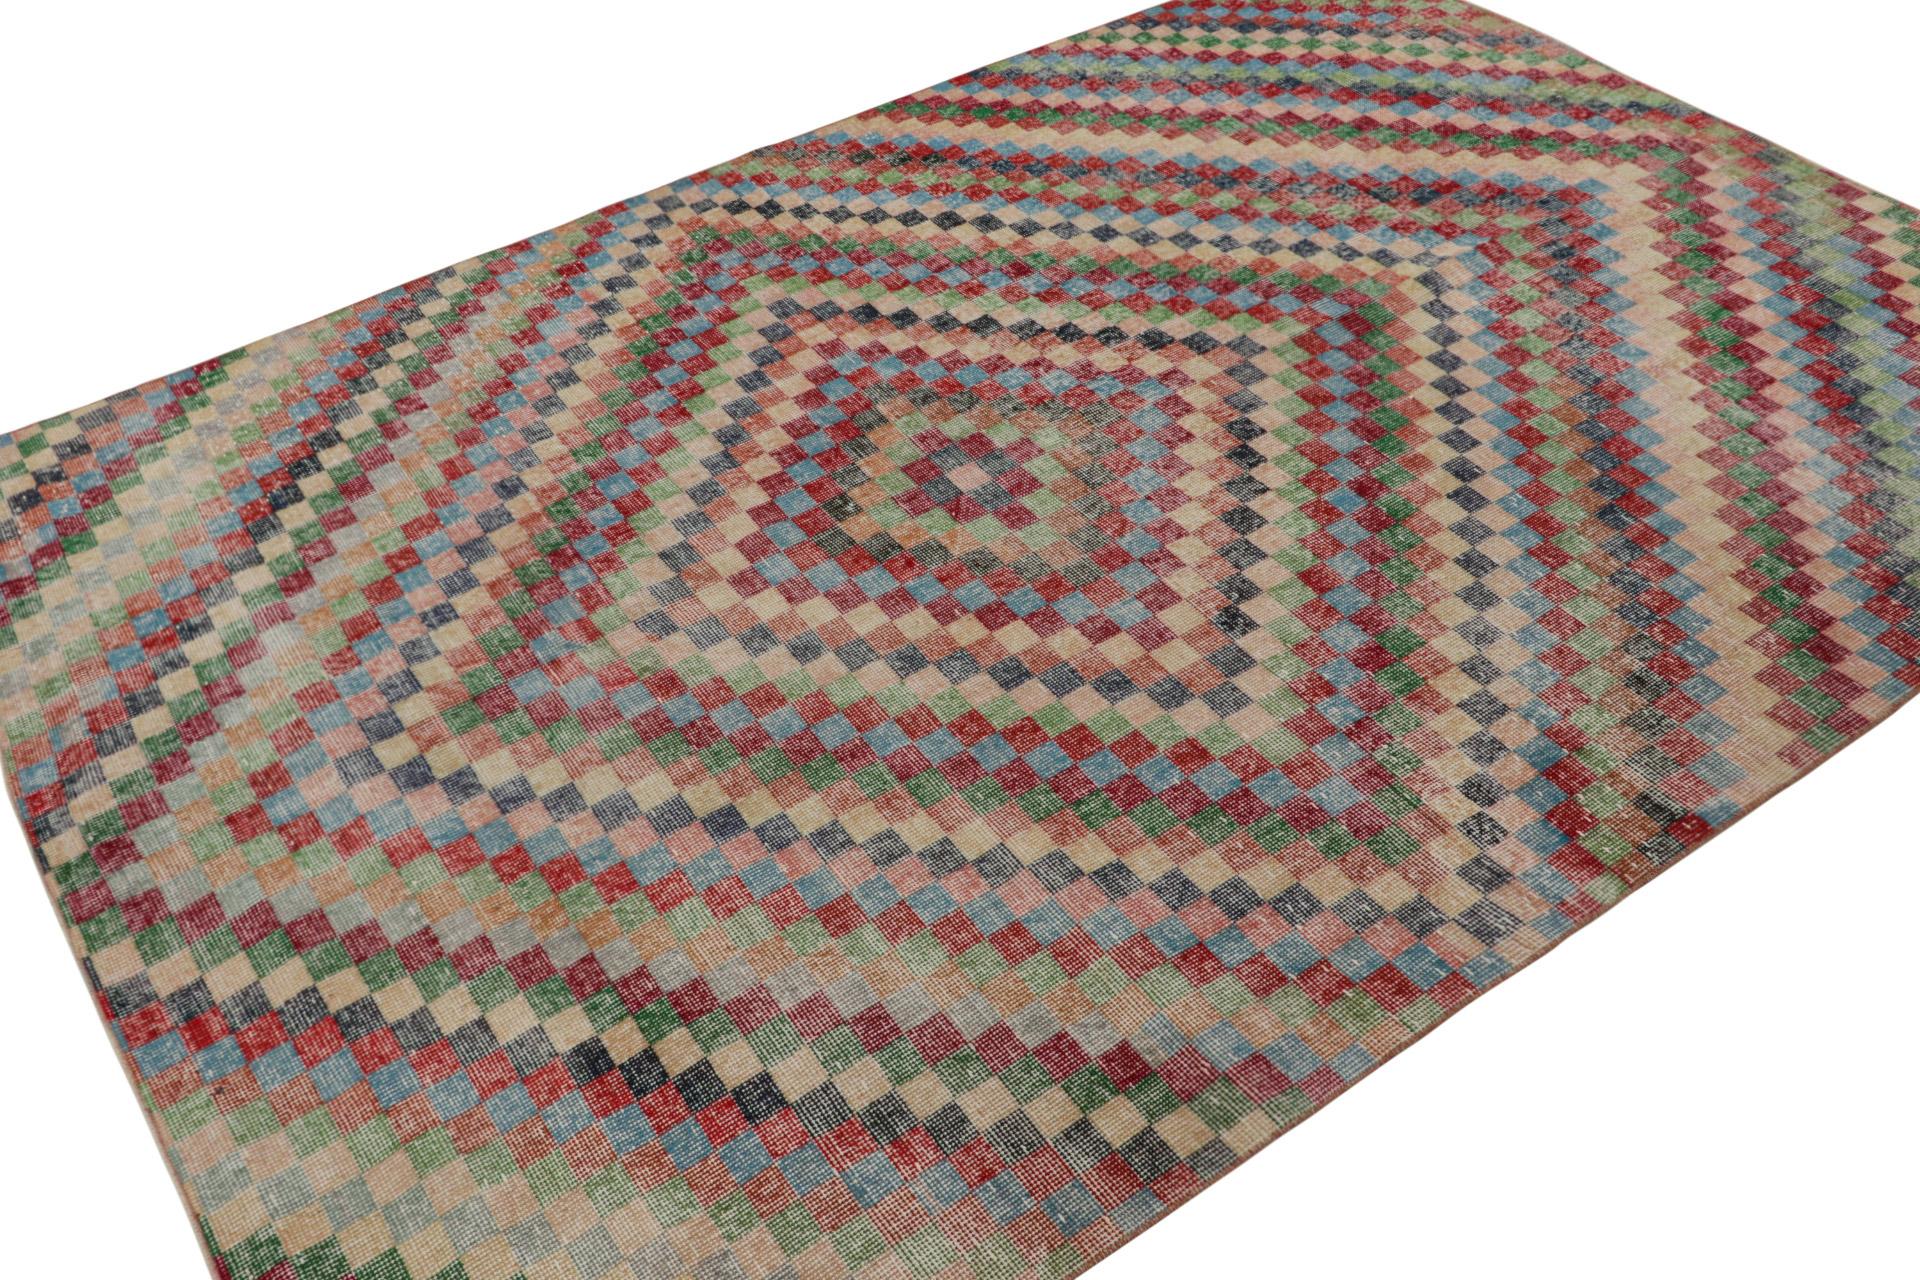 This vintage 6x9 Art Deco rug, hand-knotted in wool, circa 1960-1970, is a new addition to Rug & Kilim Collection. This line is a commemoration, with rare curations we believe to hail from multidisciplinary Turkish designer Zeki Müren. 

On the